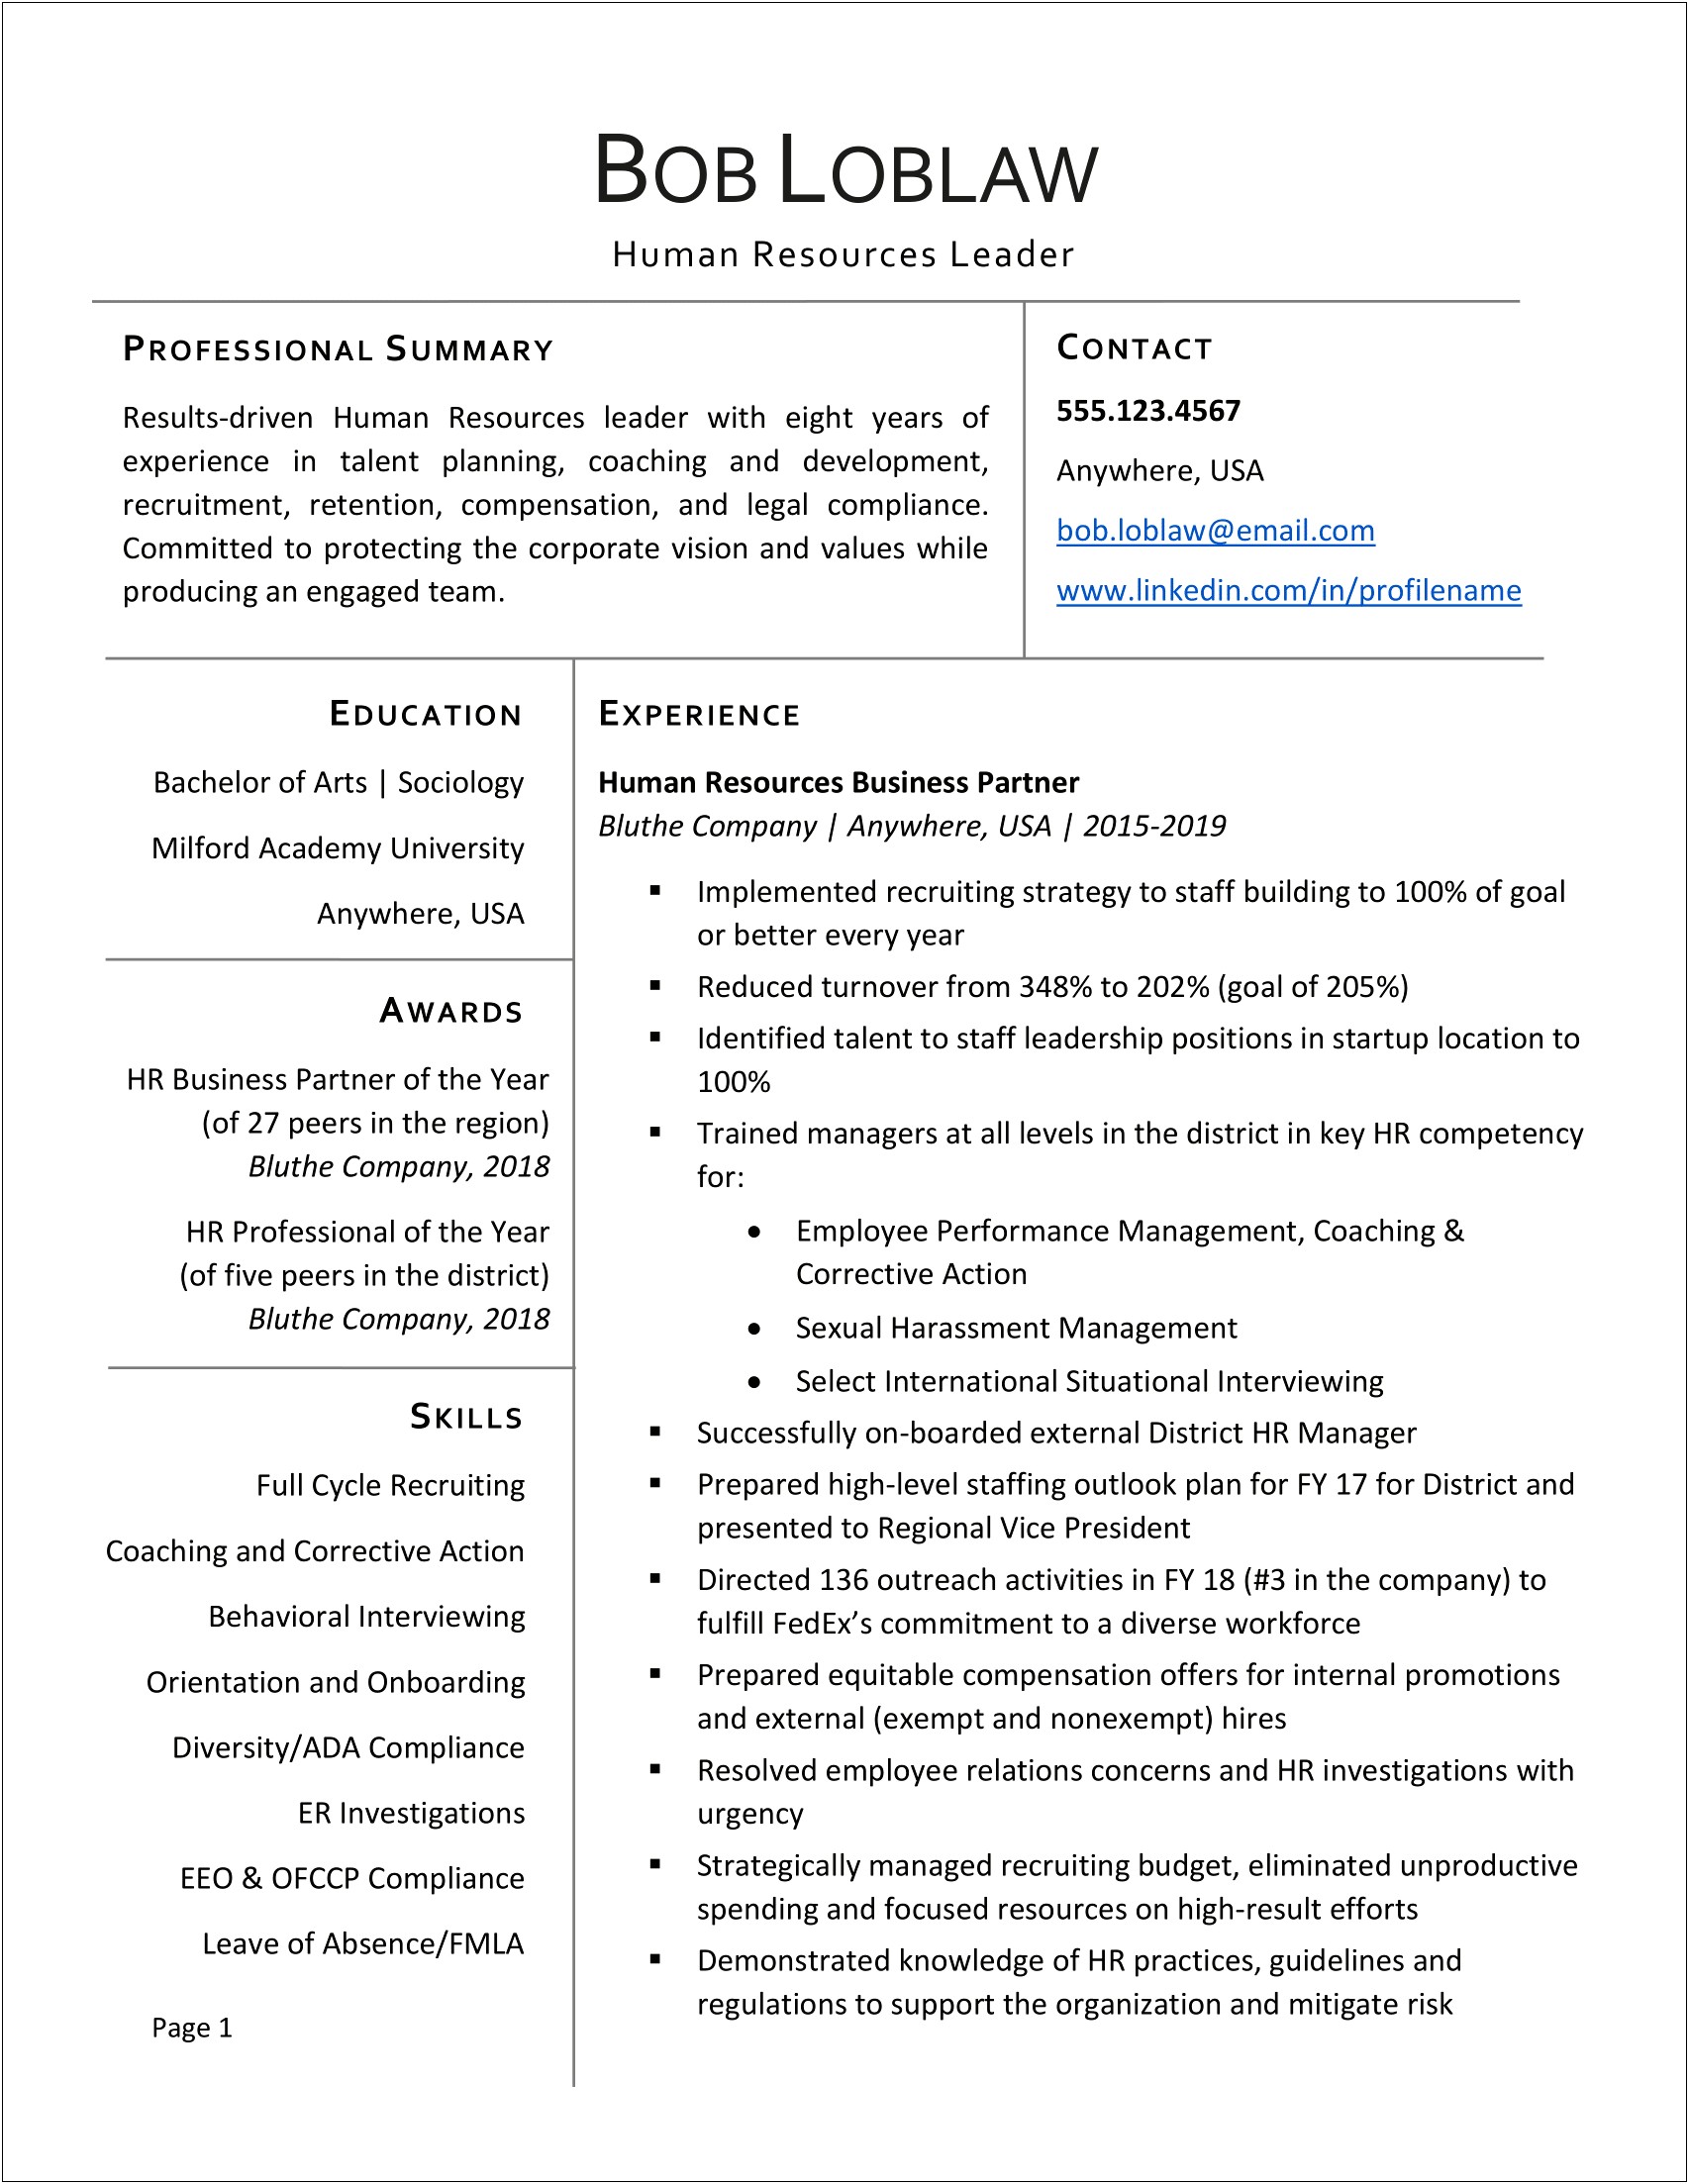 Resume Templates Where To Find Reddit